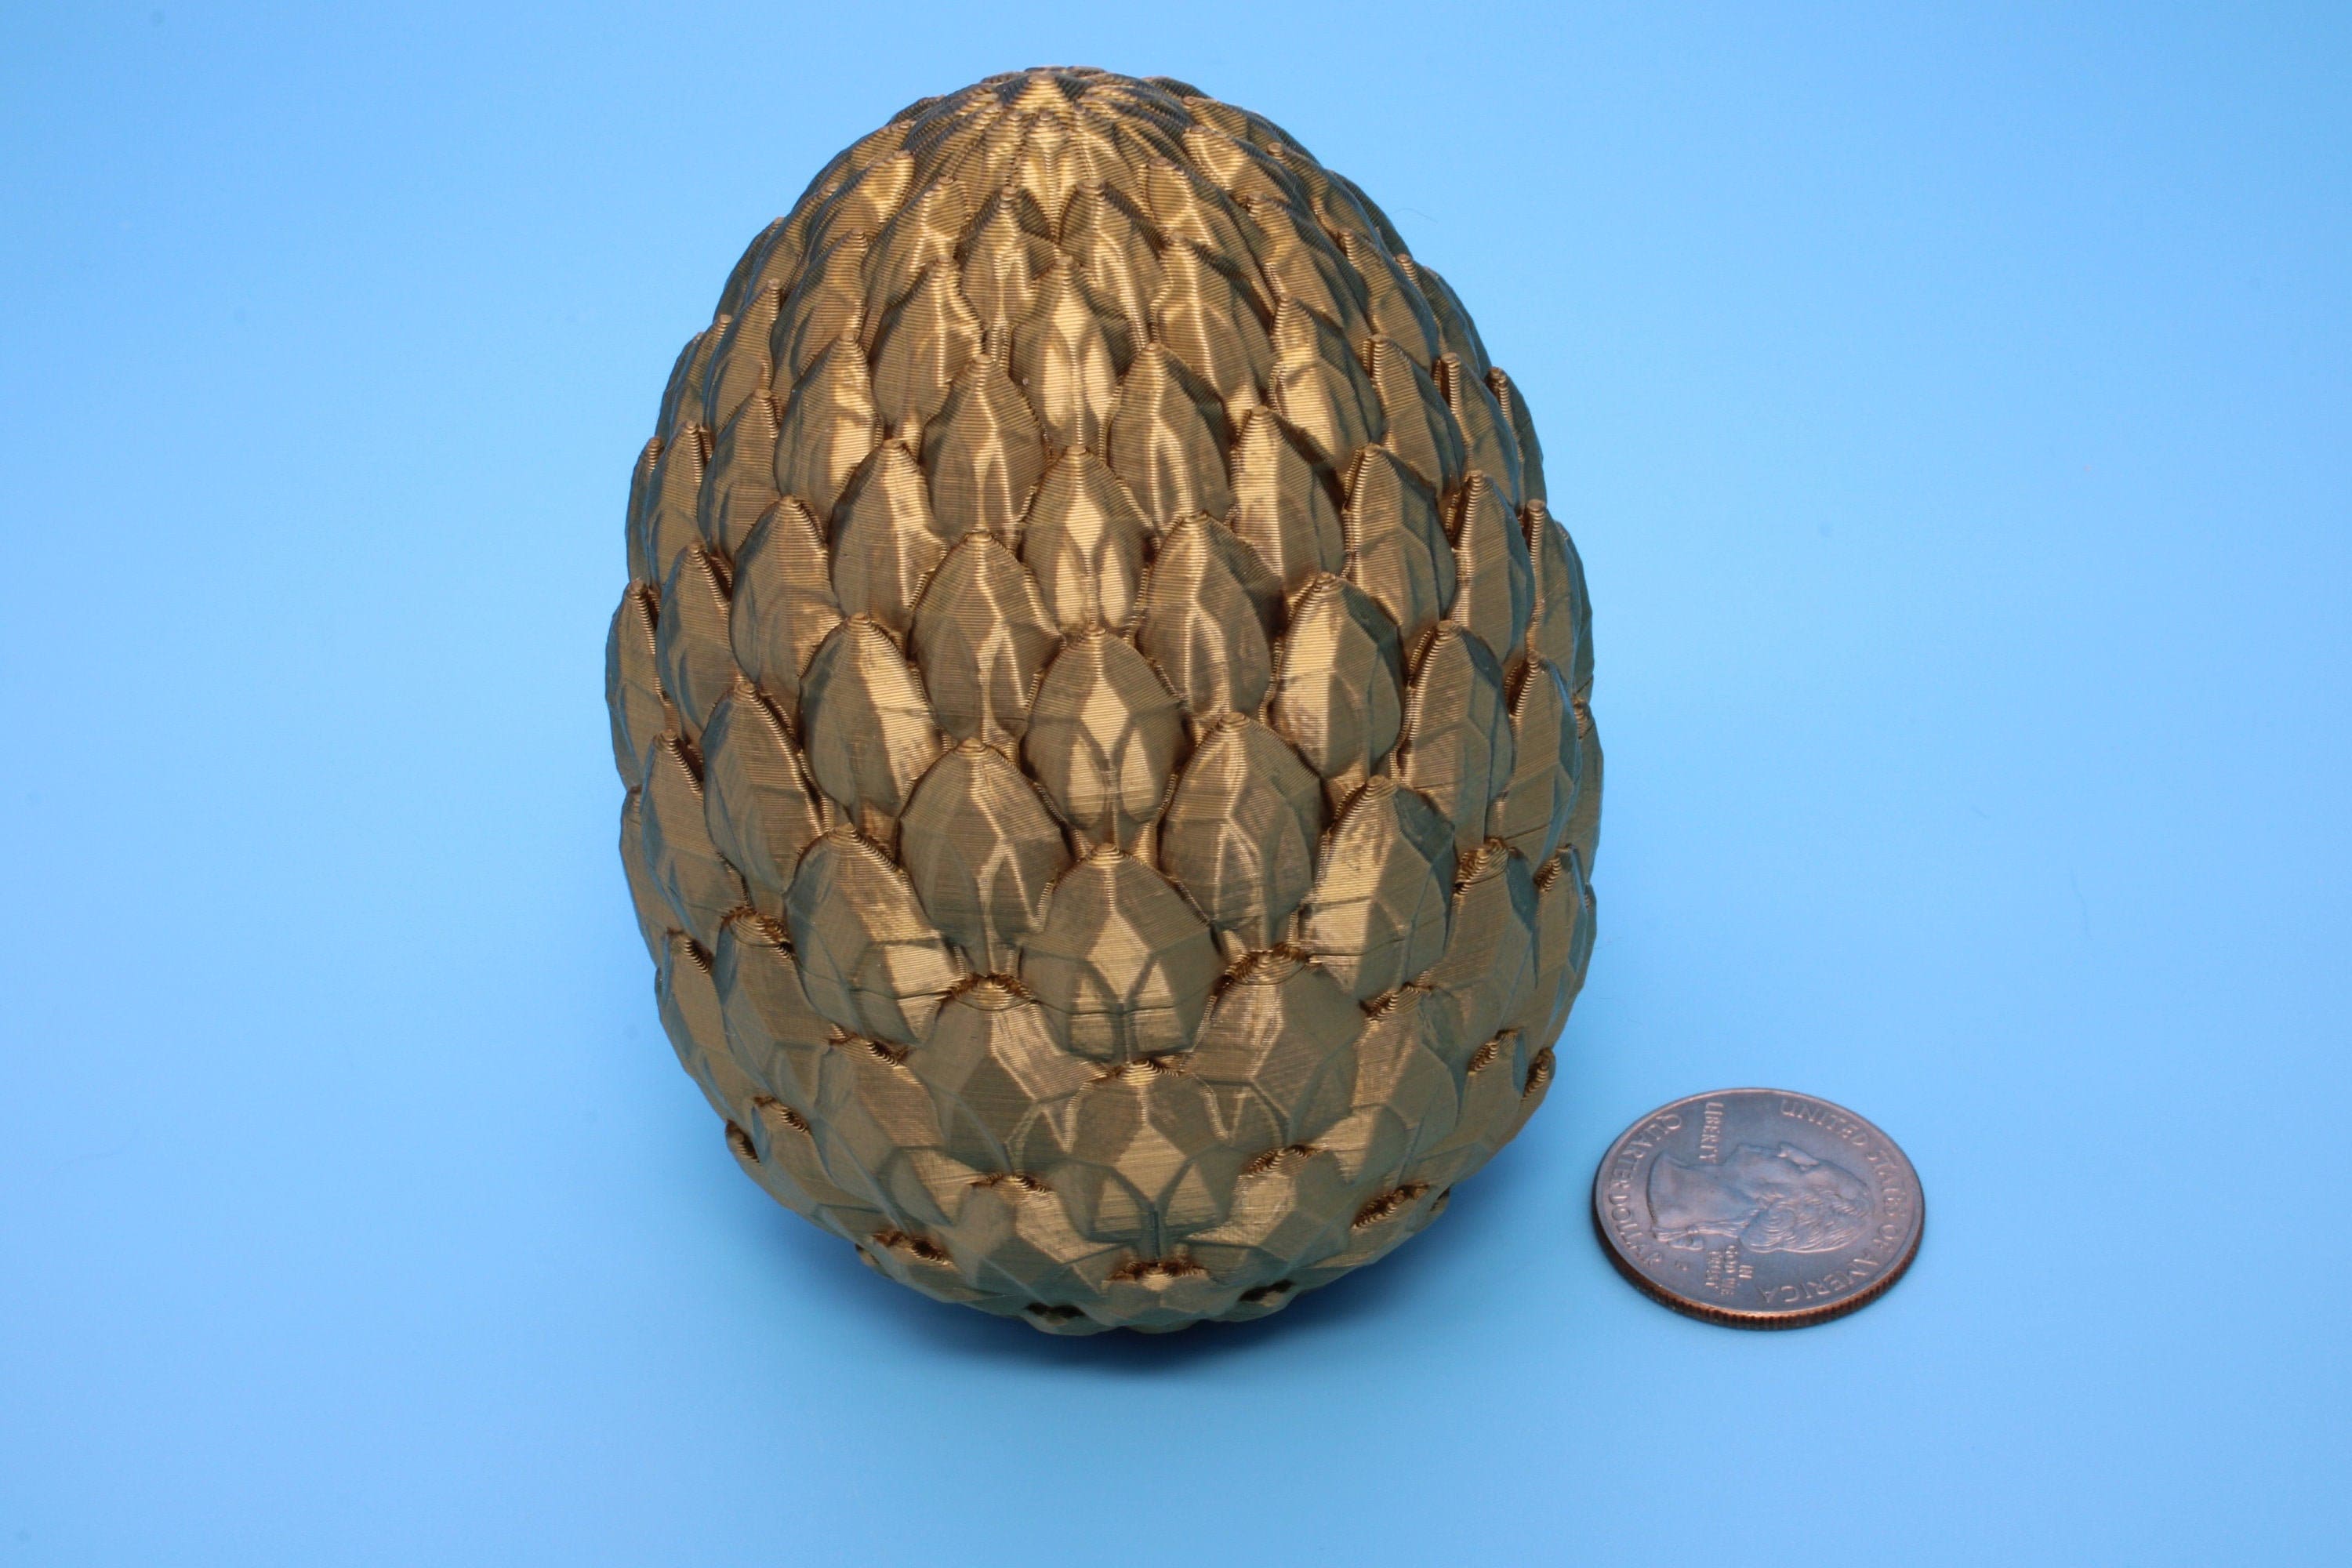 Small Dragon Scale Egg | 3D printed Dragon Egg Storage! | 3.5 in. Crystal Egg | Gift. Decorative Egg